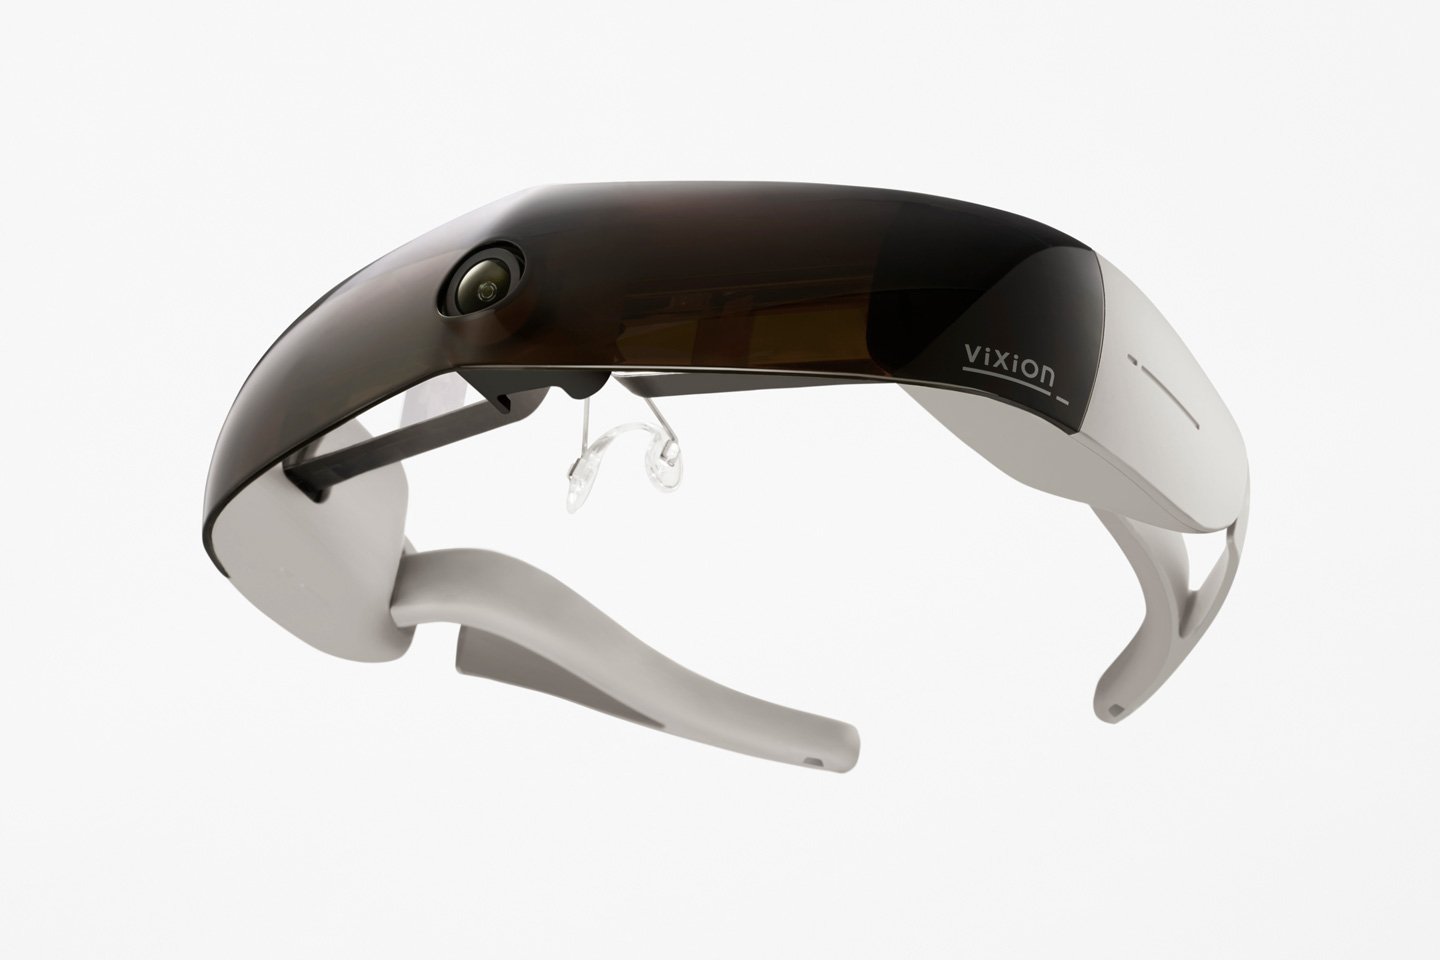 The ViXion is a mixed-reality headset designed specifically for people with low-vision and night-blindness